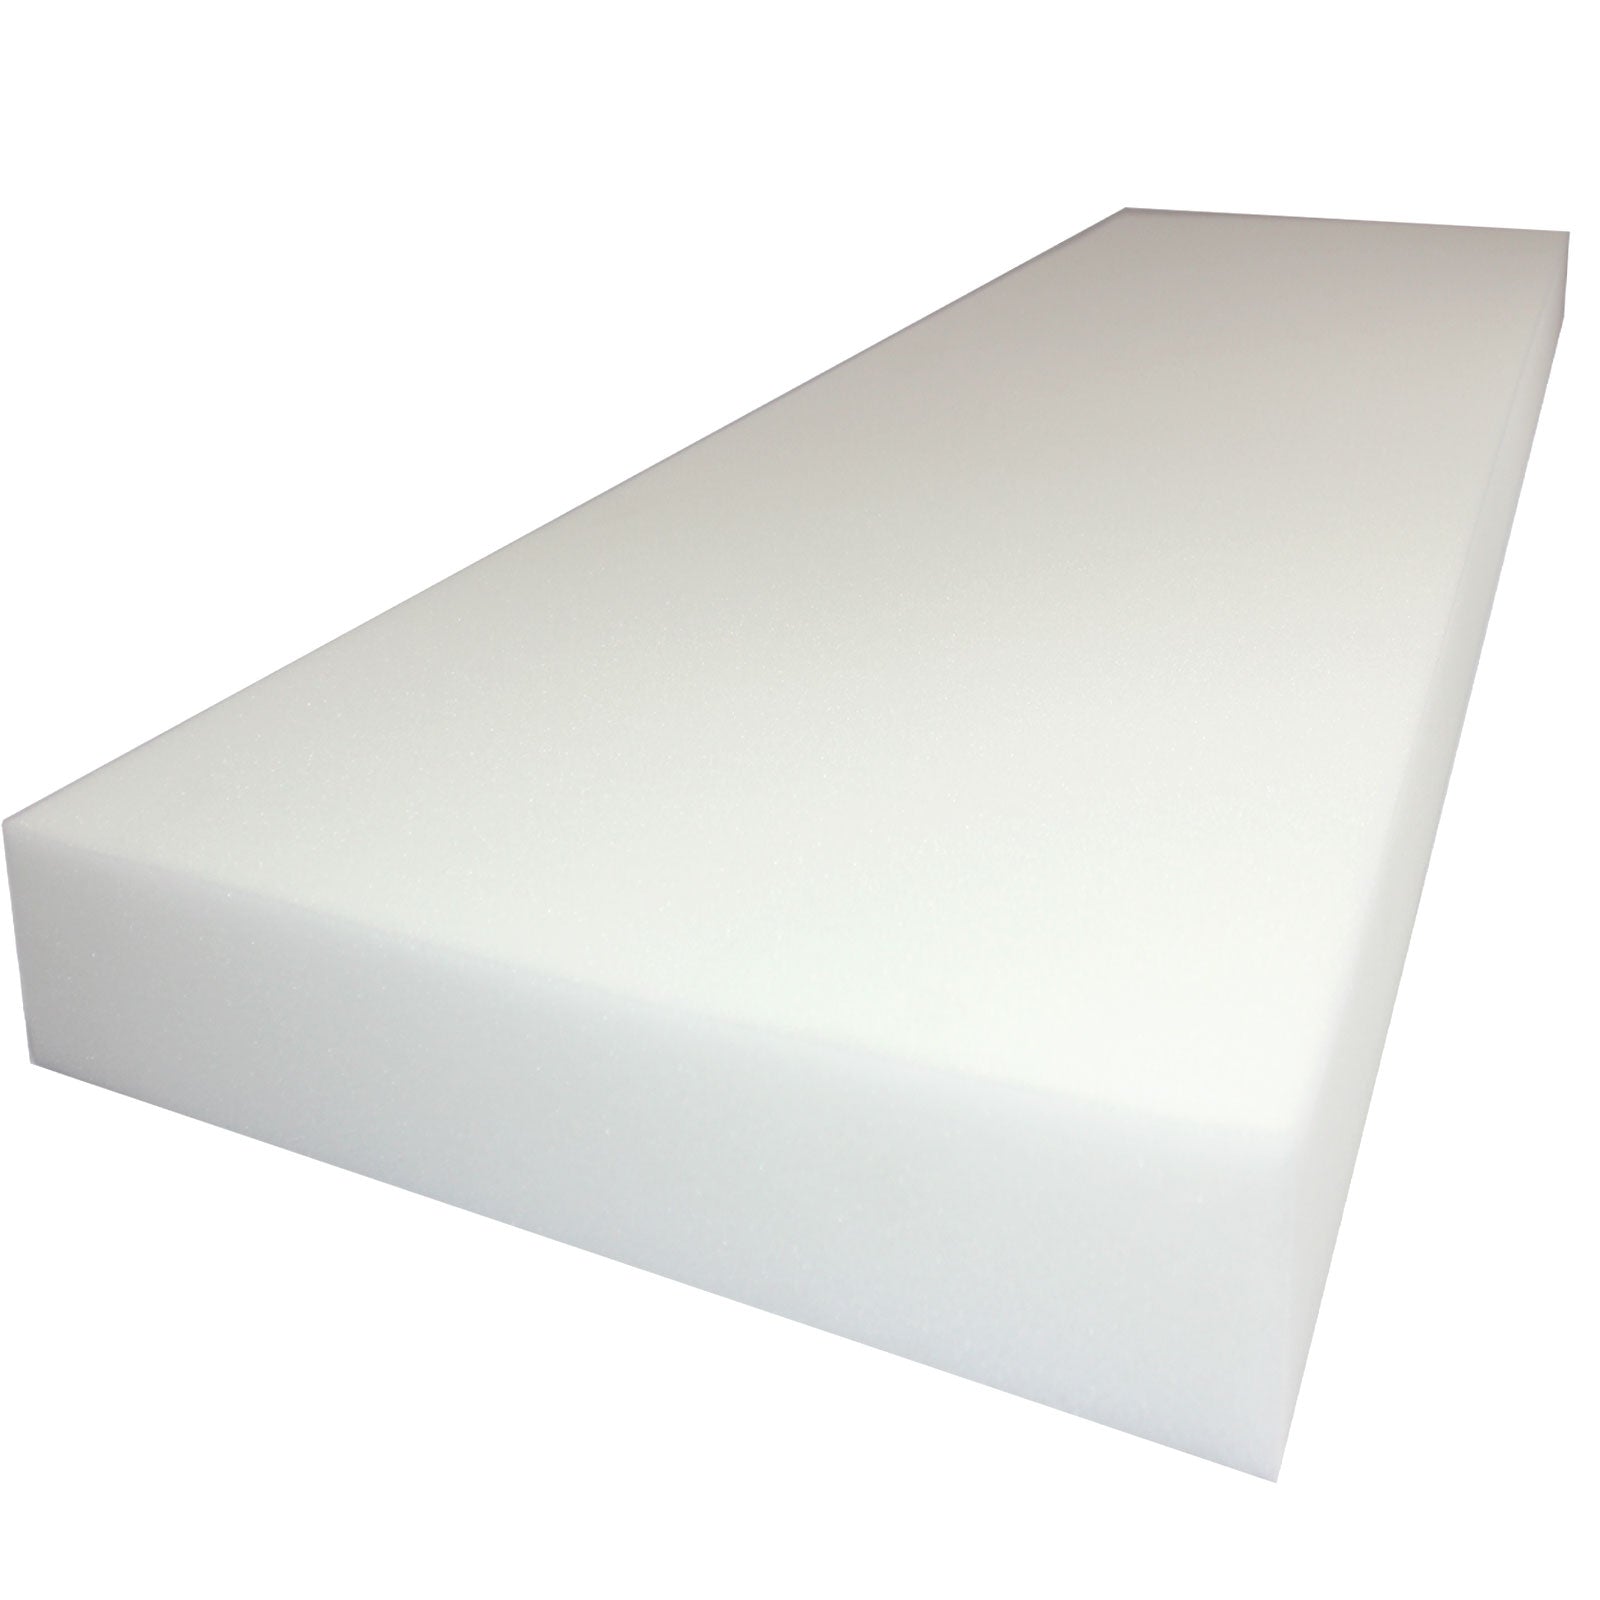 Foamy Foam High Density 2 inch Thick, 24 inch Wide, 72 inch Long Upholstery  Foam, Cushion Replacement